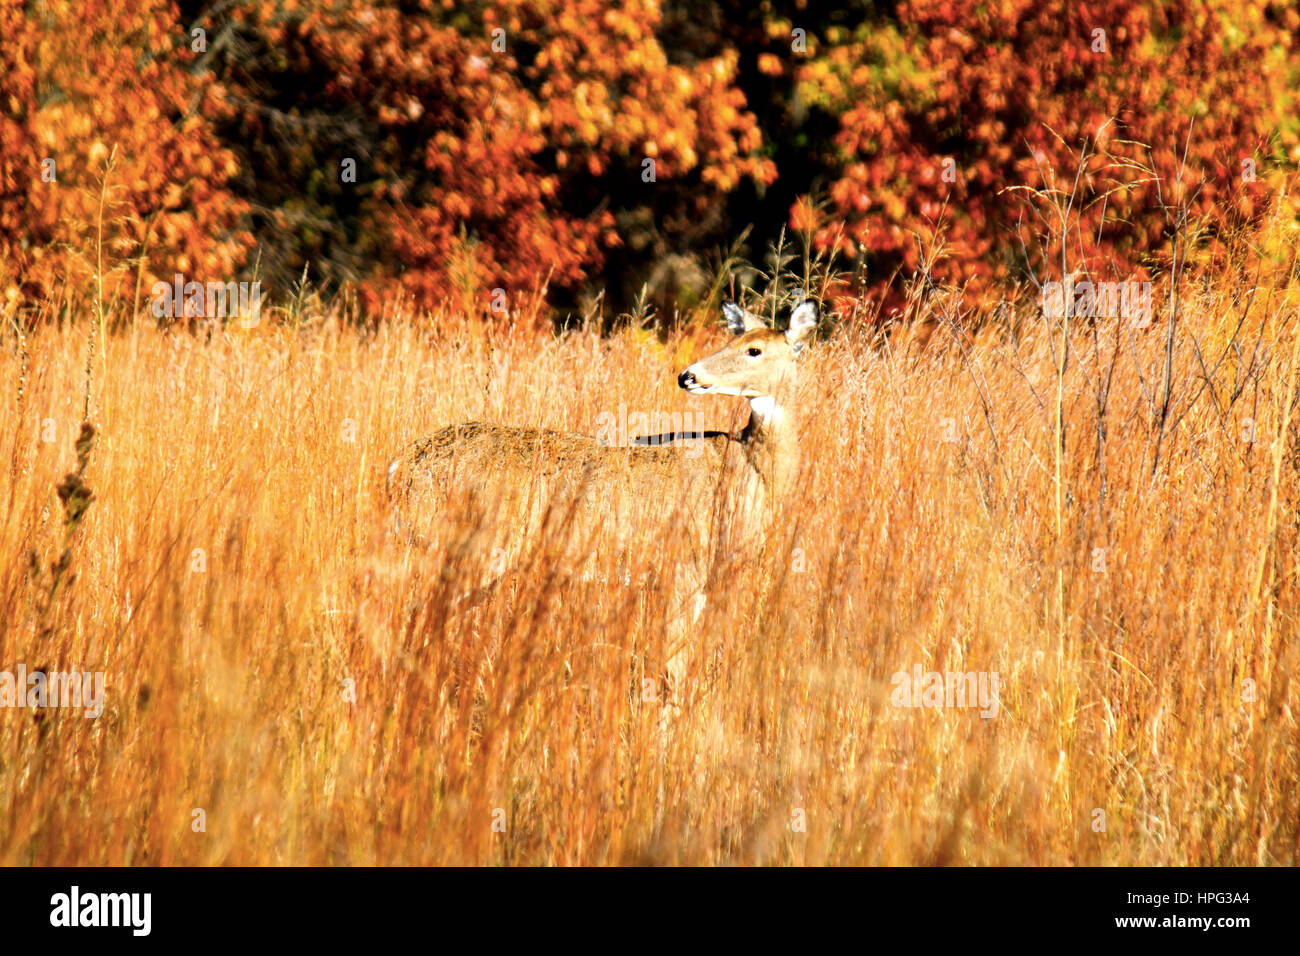 Deer sighted amongst Autumn Foliage in Midwestern Forestry along Indiana Dunes National Lakeshore in October 2016 Stock Photo